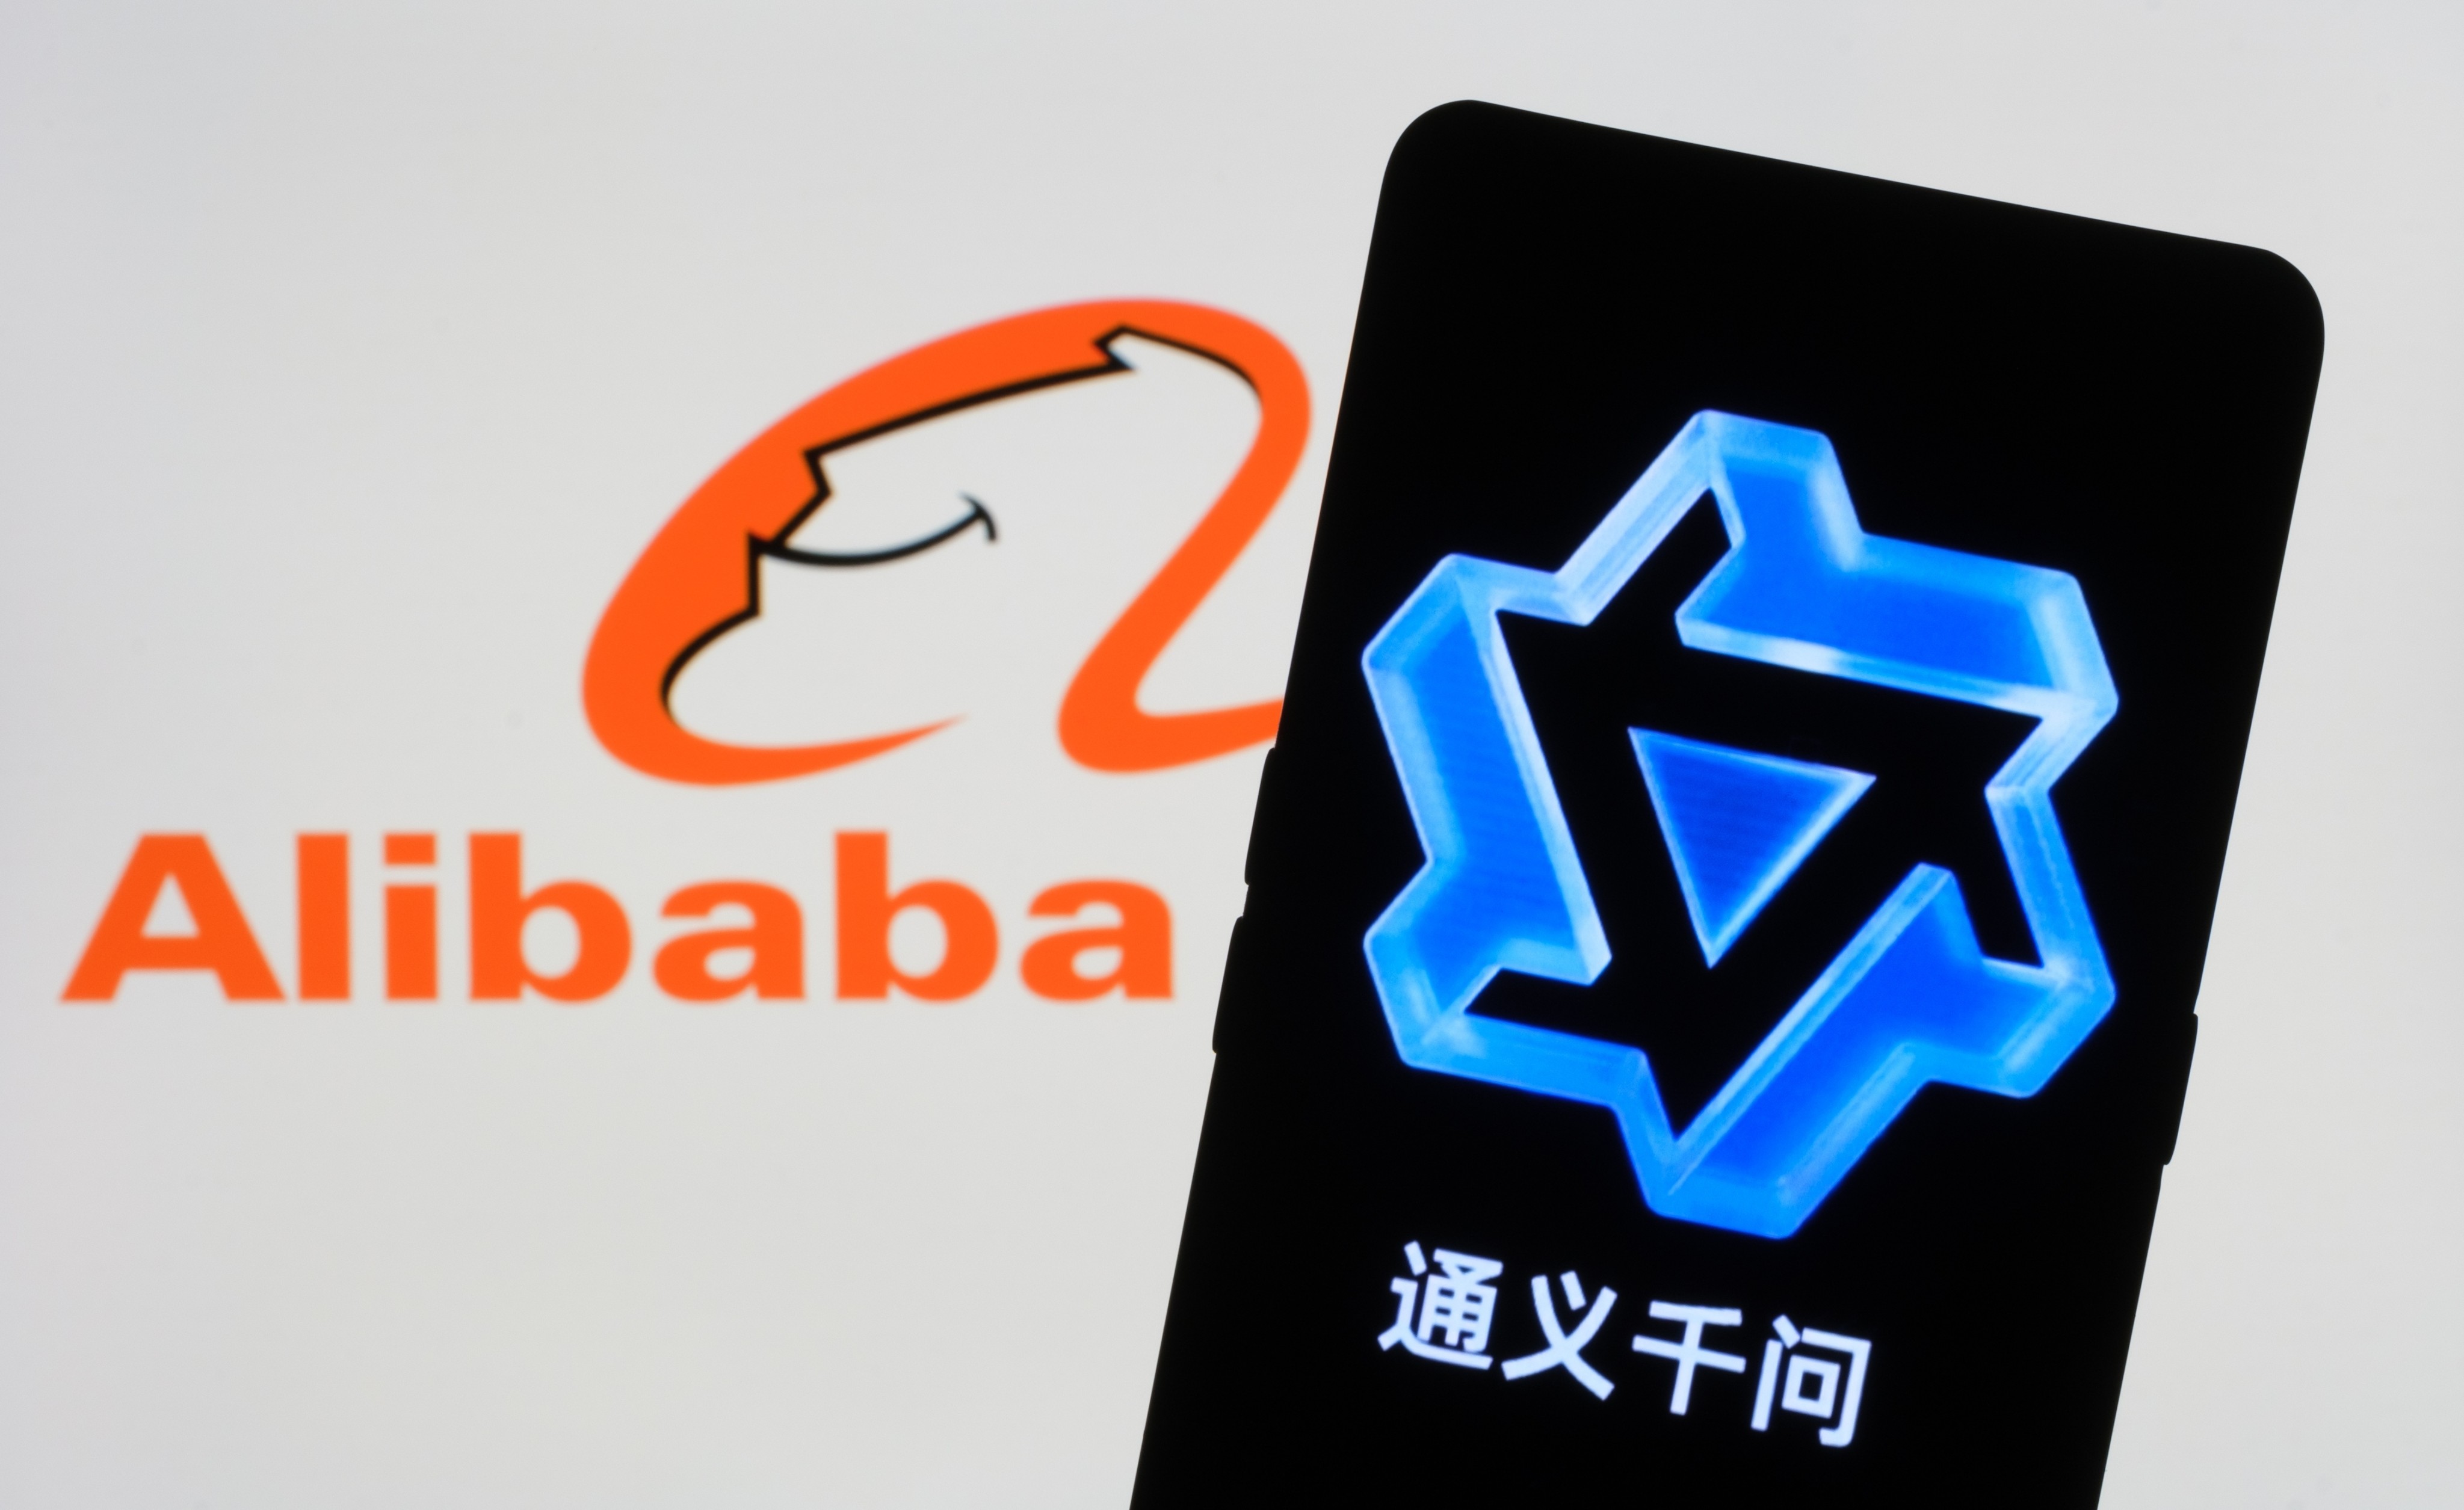 The logo of Alibaba Cloud’s artificial intelligence large language model, Tongyi Qianwen, is seen on a smartphone screen on April 11, 2023. Photo: Shutterstock